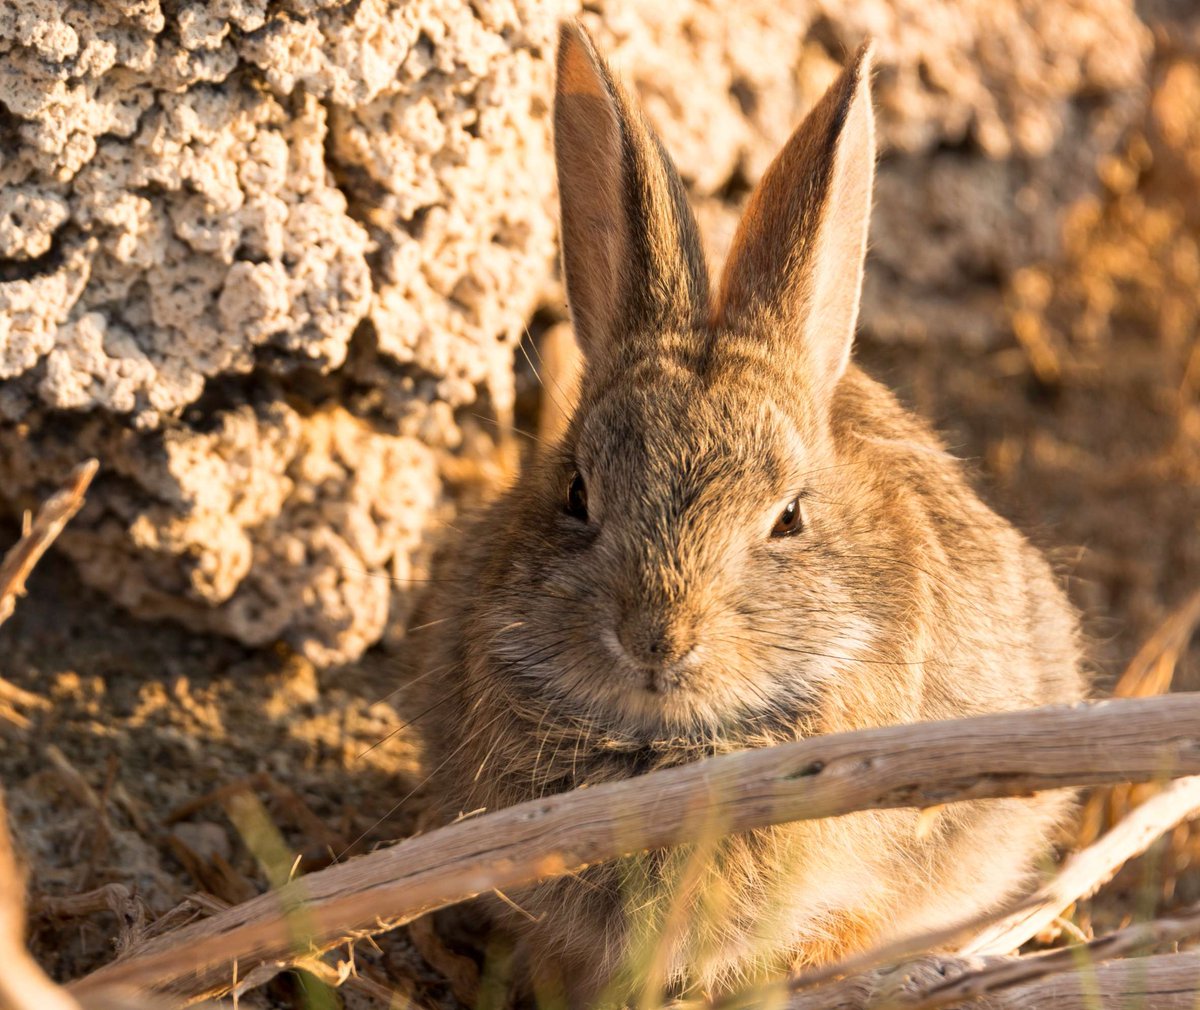 This is the desert cottontail. And for the record, they don't lay eggs. 🥚🥚🥚 They give birth to kits. These southwestern cuties are prolific breeders and they can have multiple litters of kits in one year! Photo by Derek Neumann